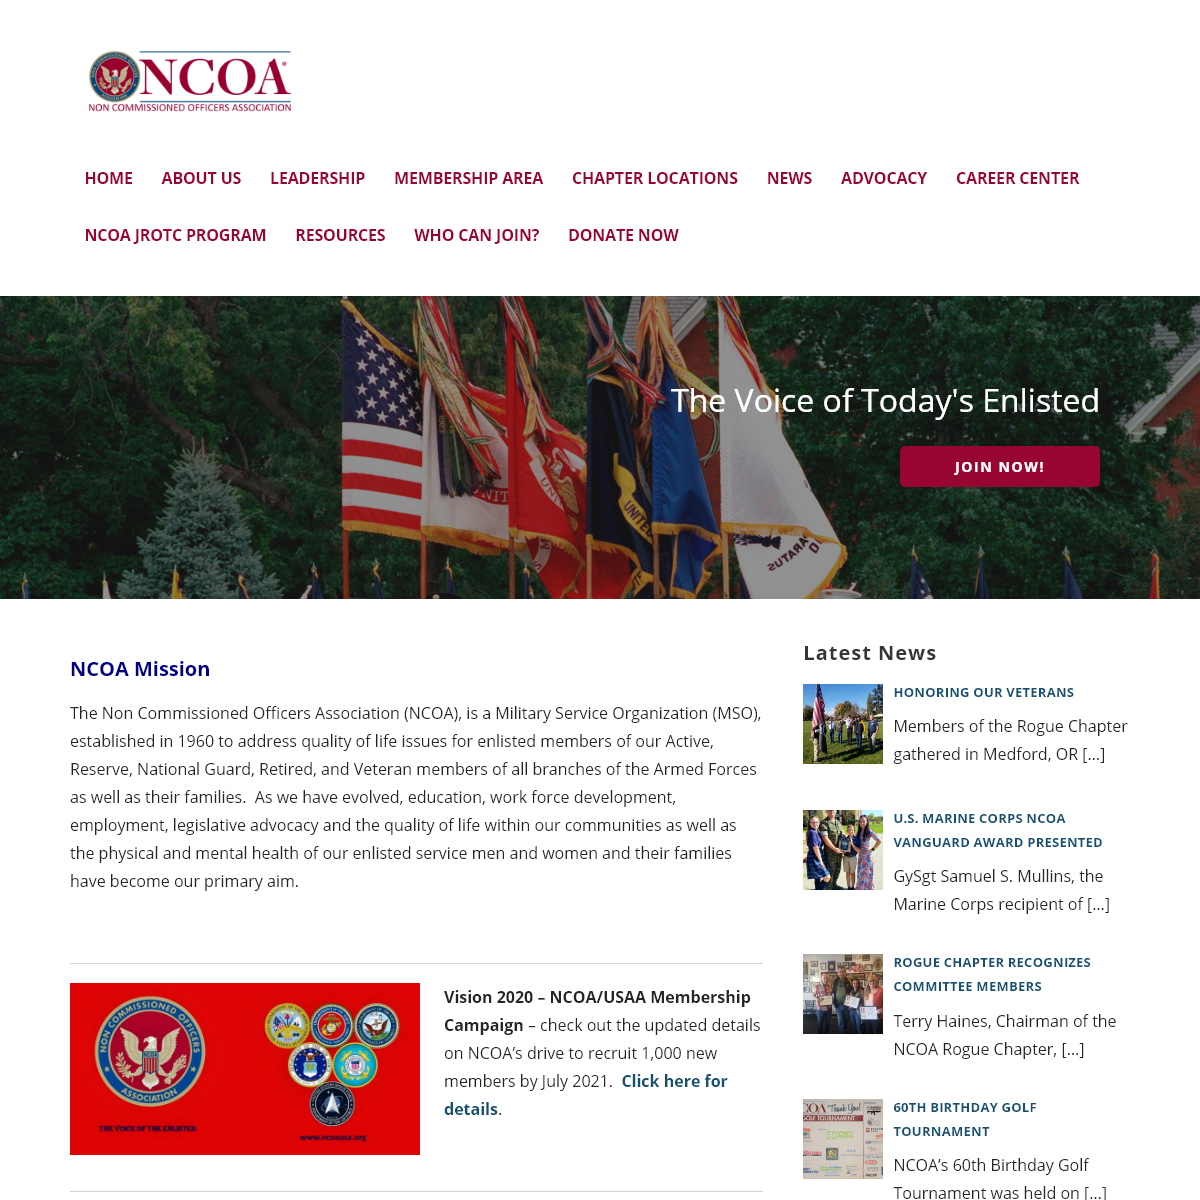 A complete backup of ncoausa.org